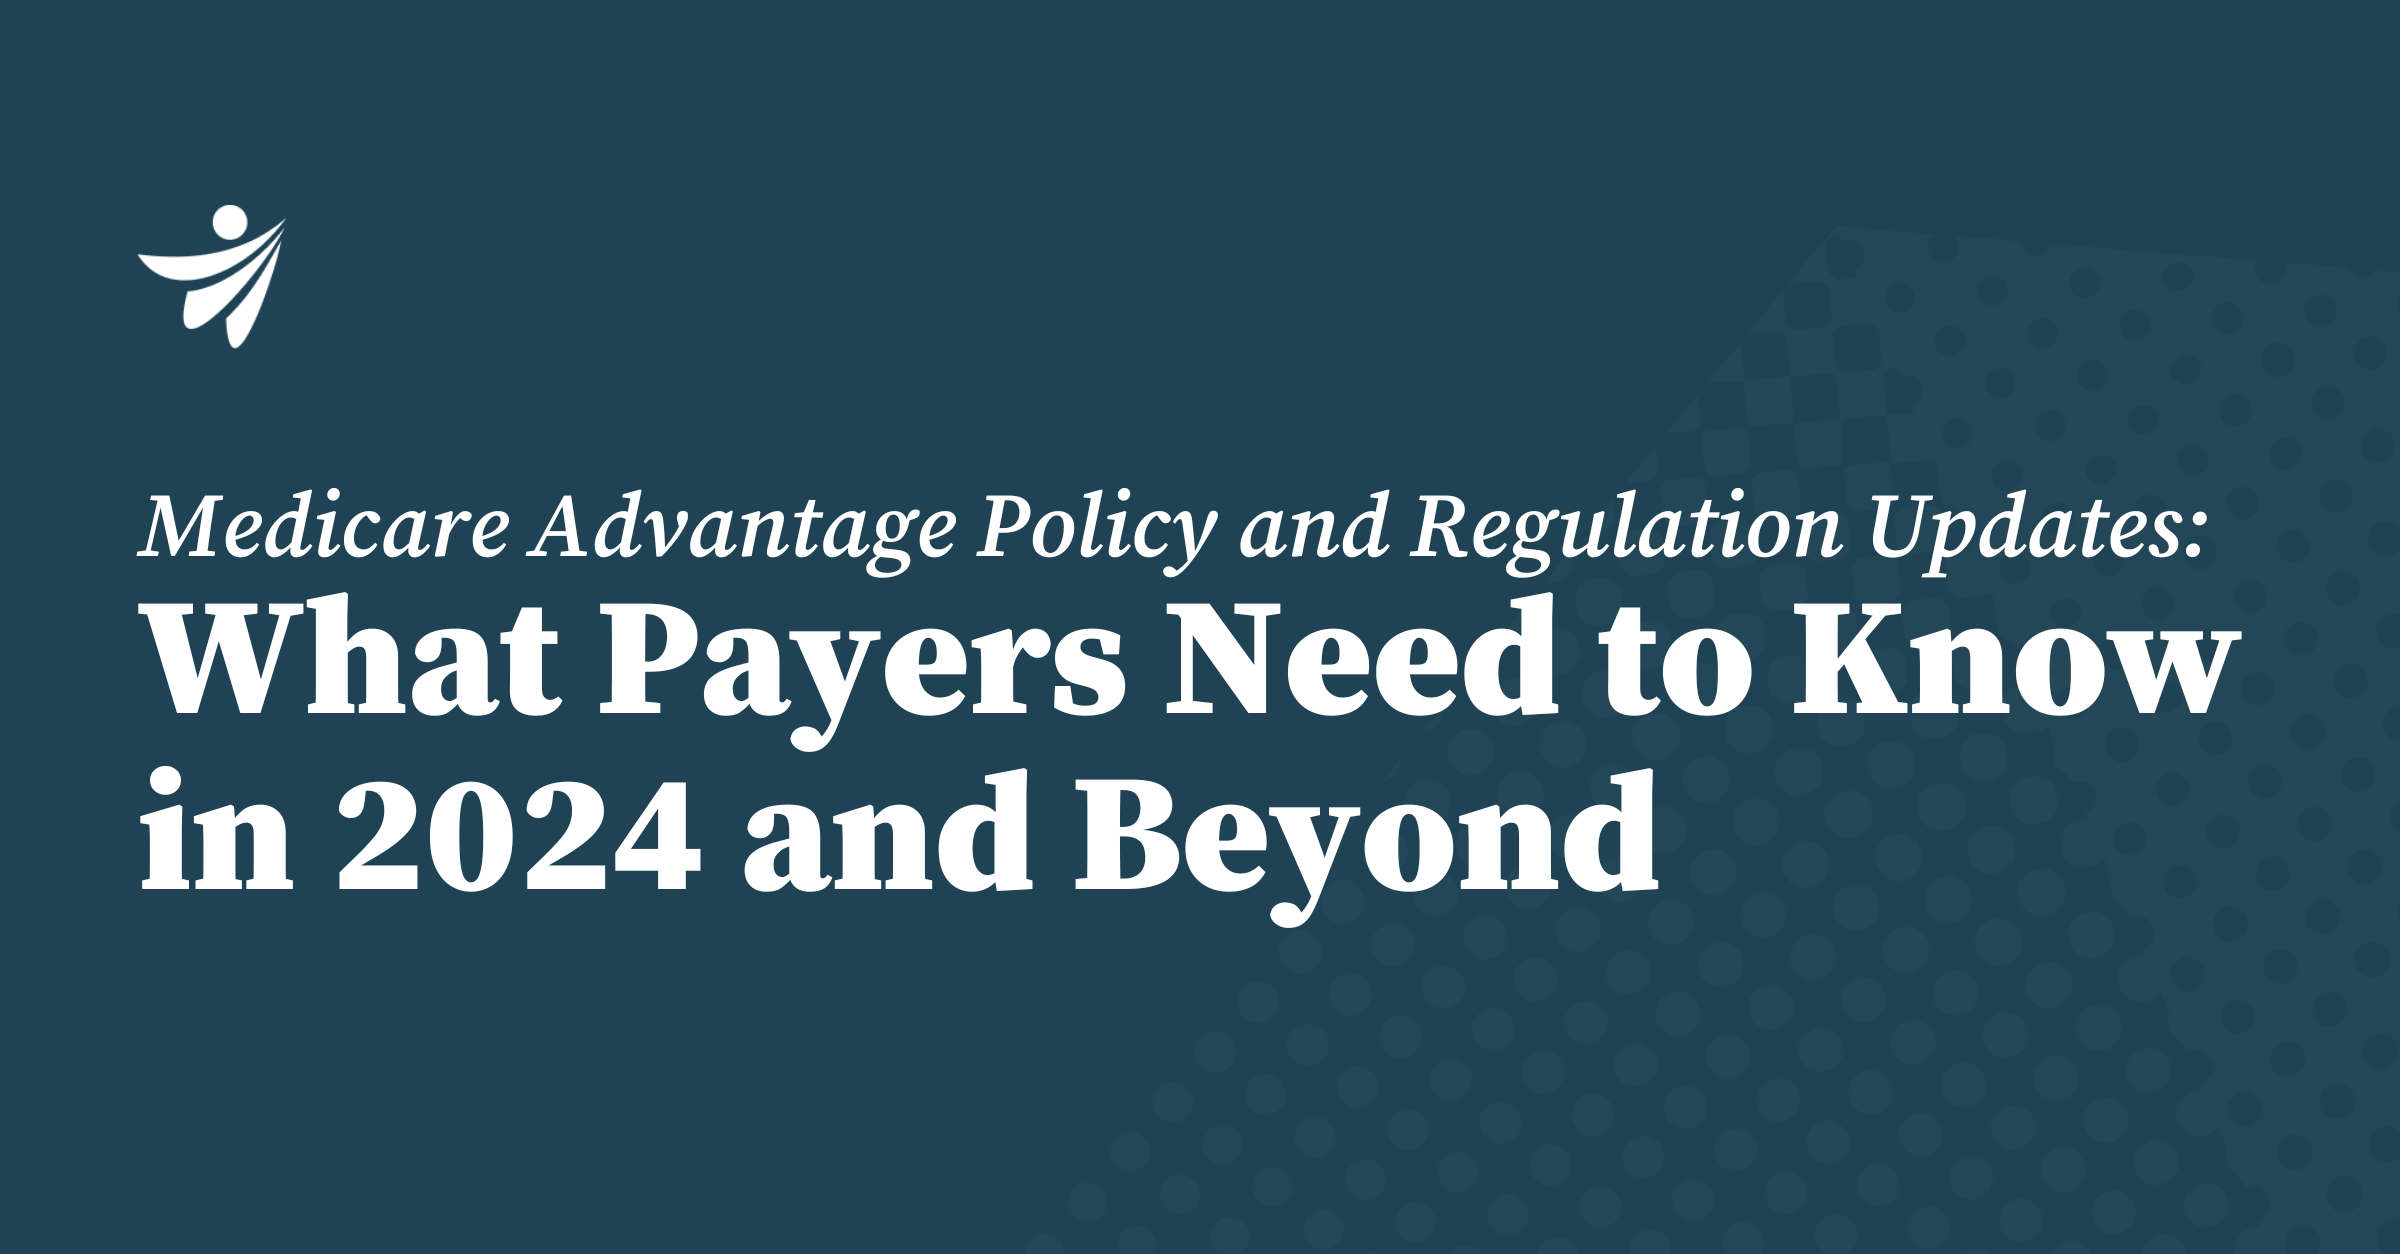 Thumbnail for Medicare Advantage Policy and Regulation Updates: What Payers Need to Know in 2024 and Beyond